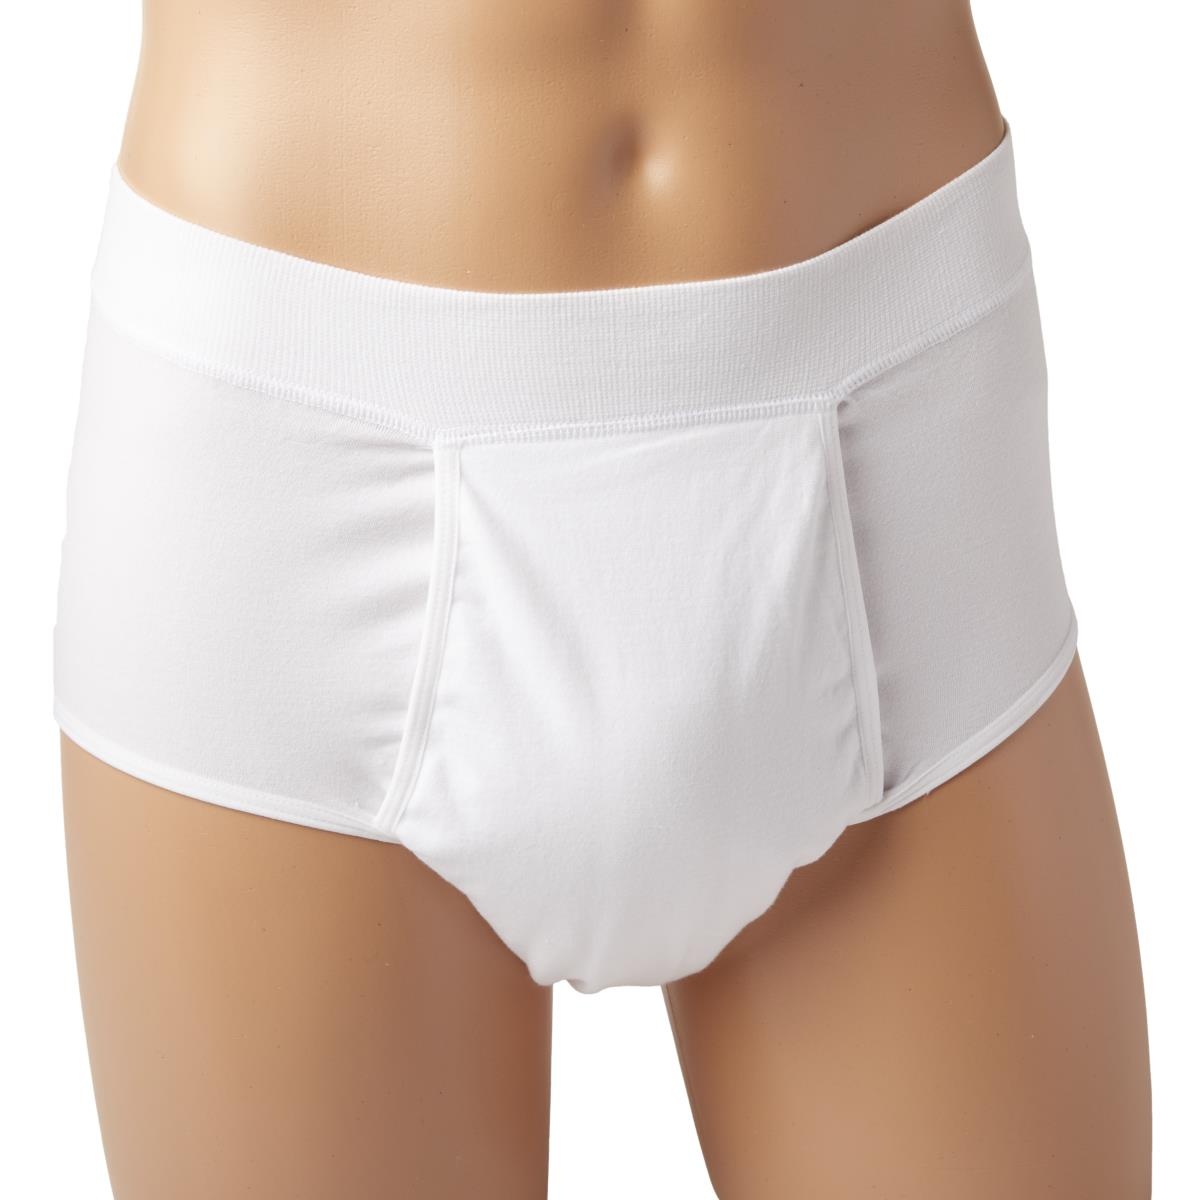 Breathable Incontinence Bladder Control Underwear For Men And Women  Washable Urinary Briefs For Adult Menstrual Care 230602 From Pong04, $11.24